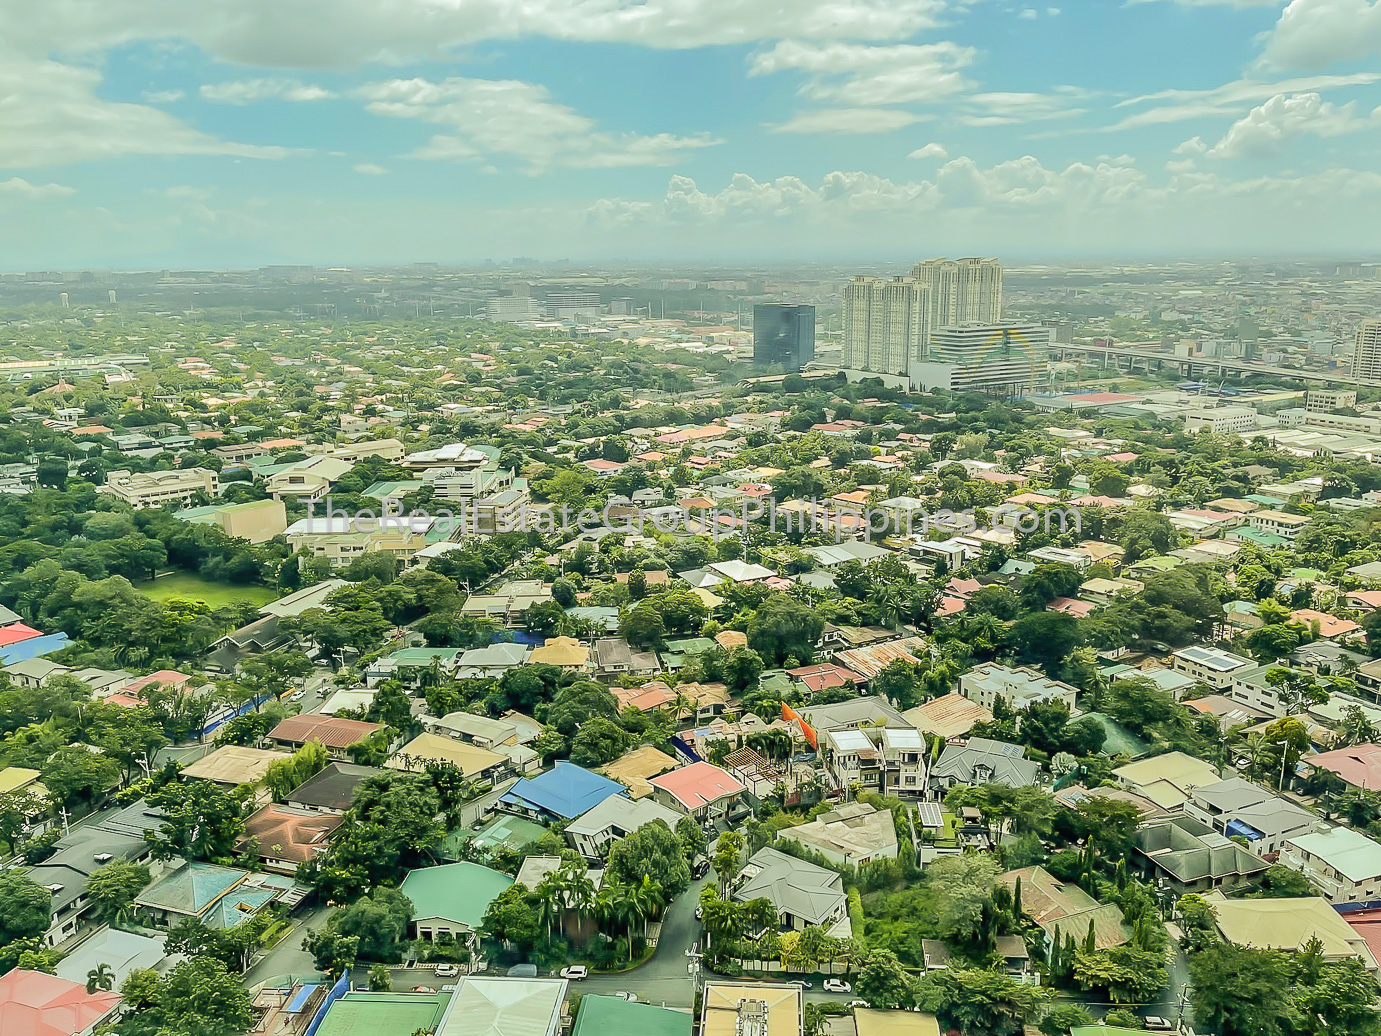 3 Bedroom For Sale The Residences At Greenbelt Makati3